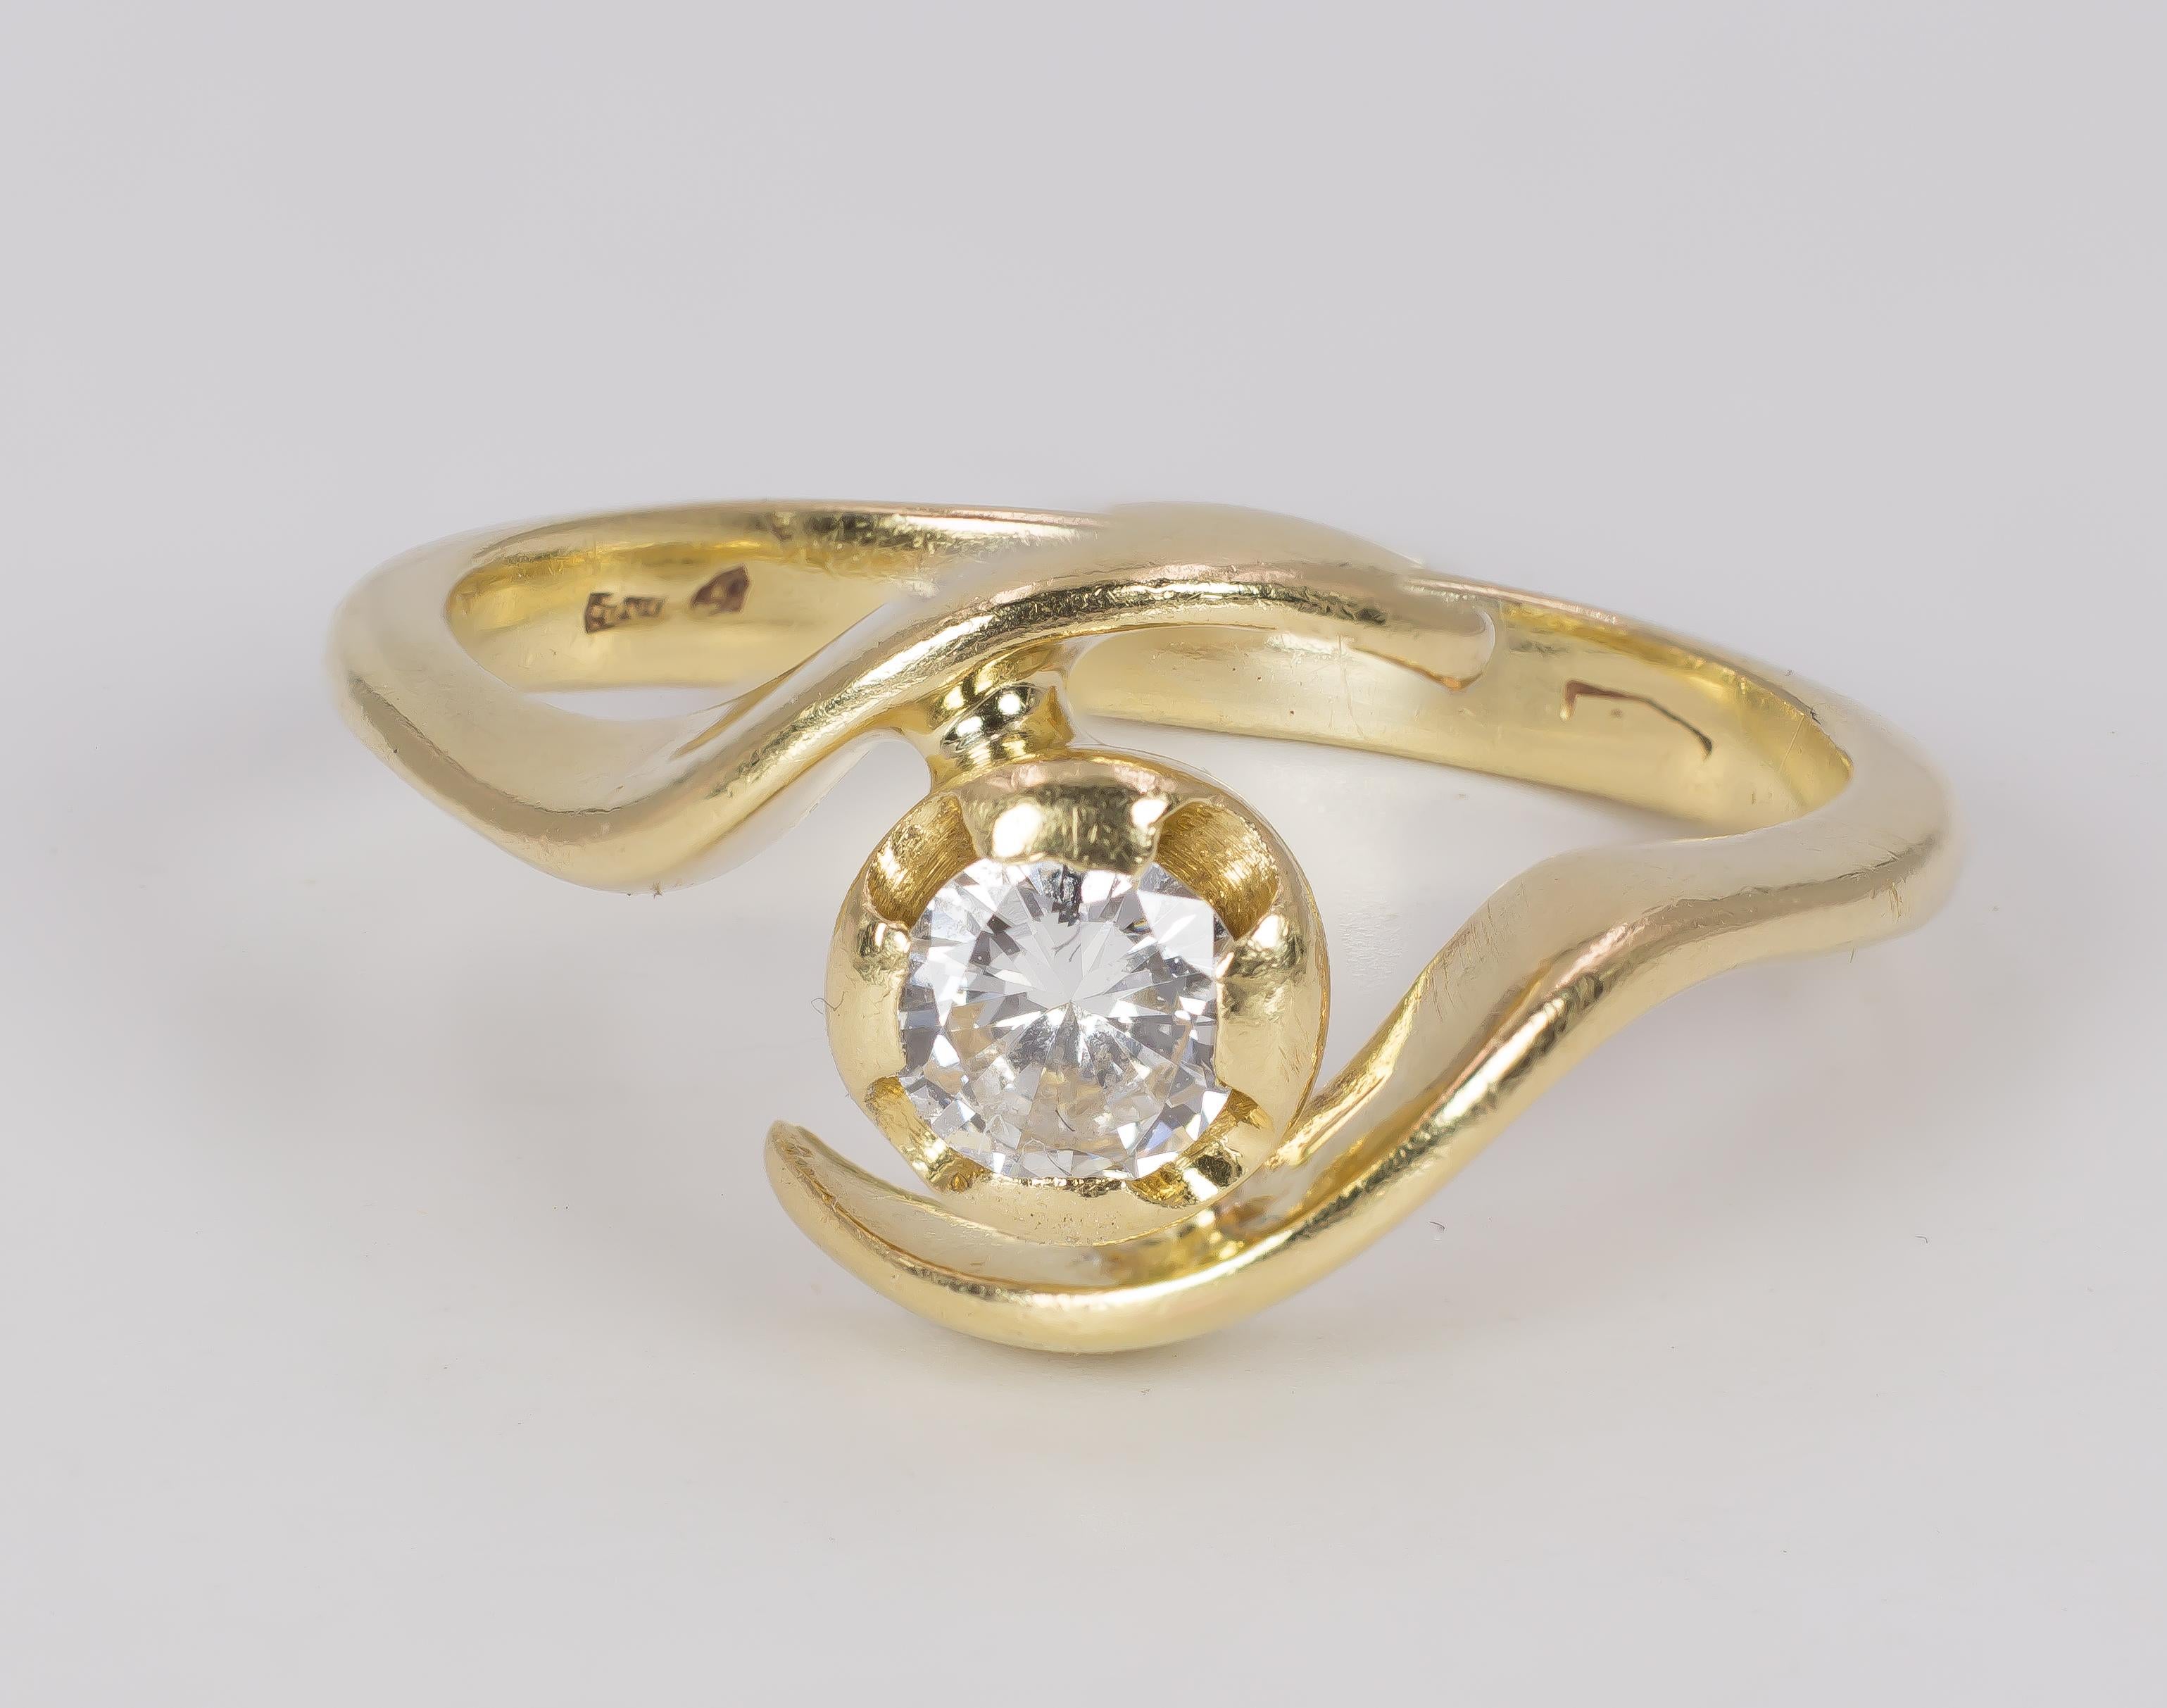 A particular vintage solitaire ring, dating from the 1970s. The peculiarity of this ring is its shank: it splits in two parts, creating two 